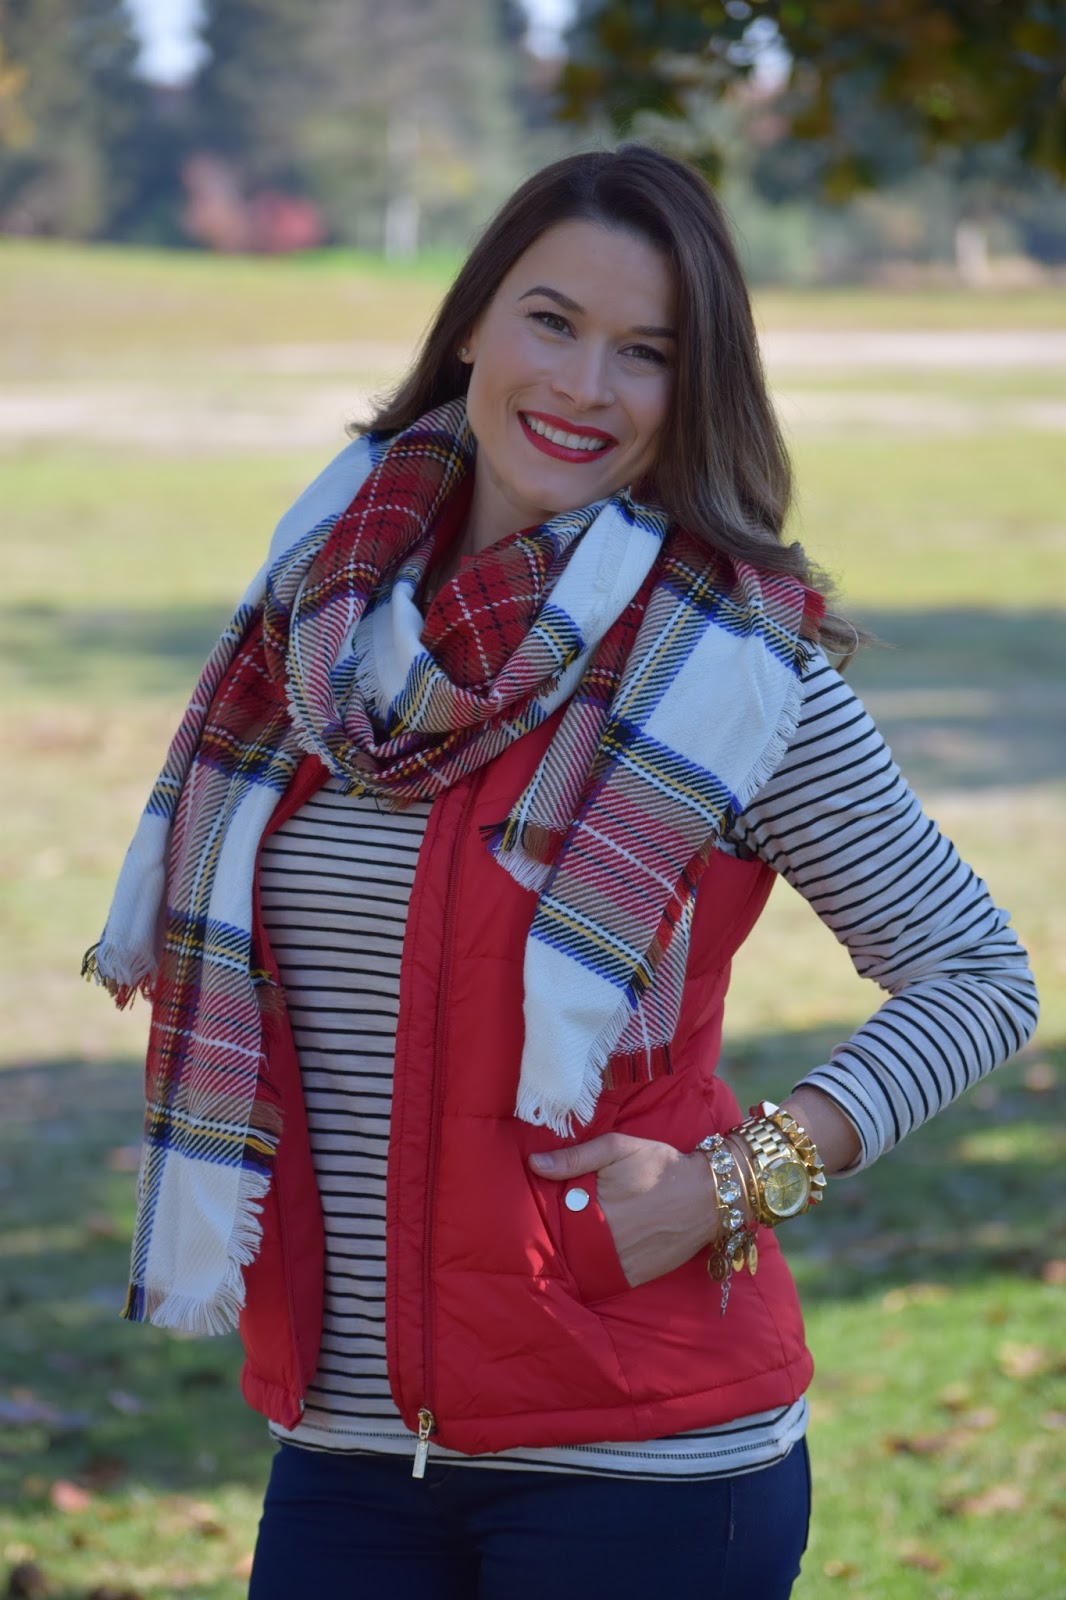 Jewelry & Jeans: Red, White, and Striped